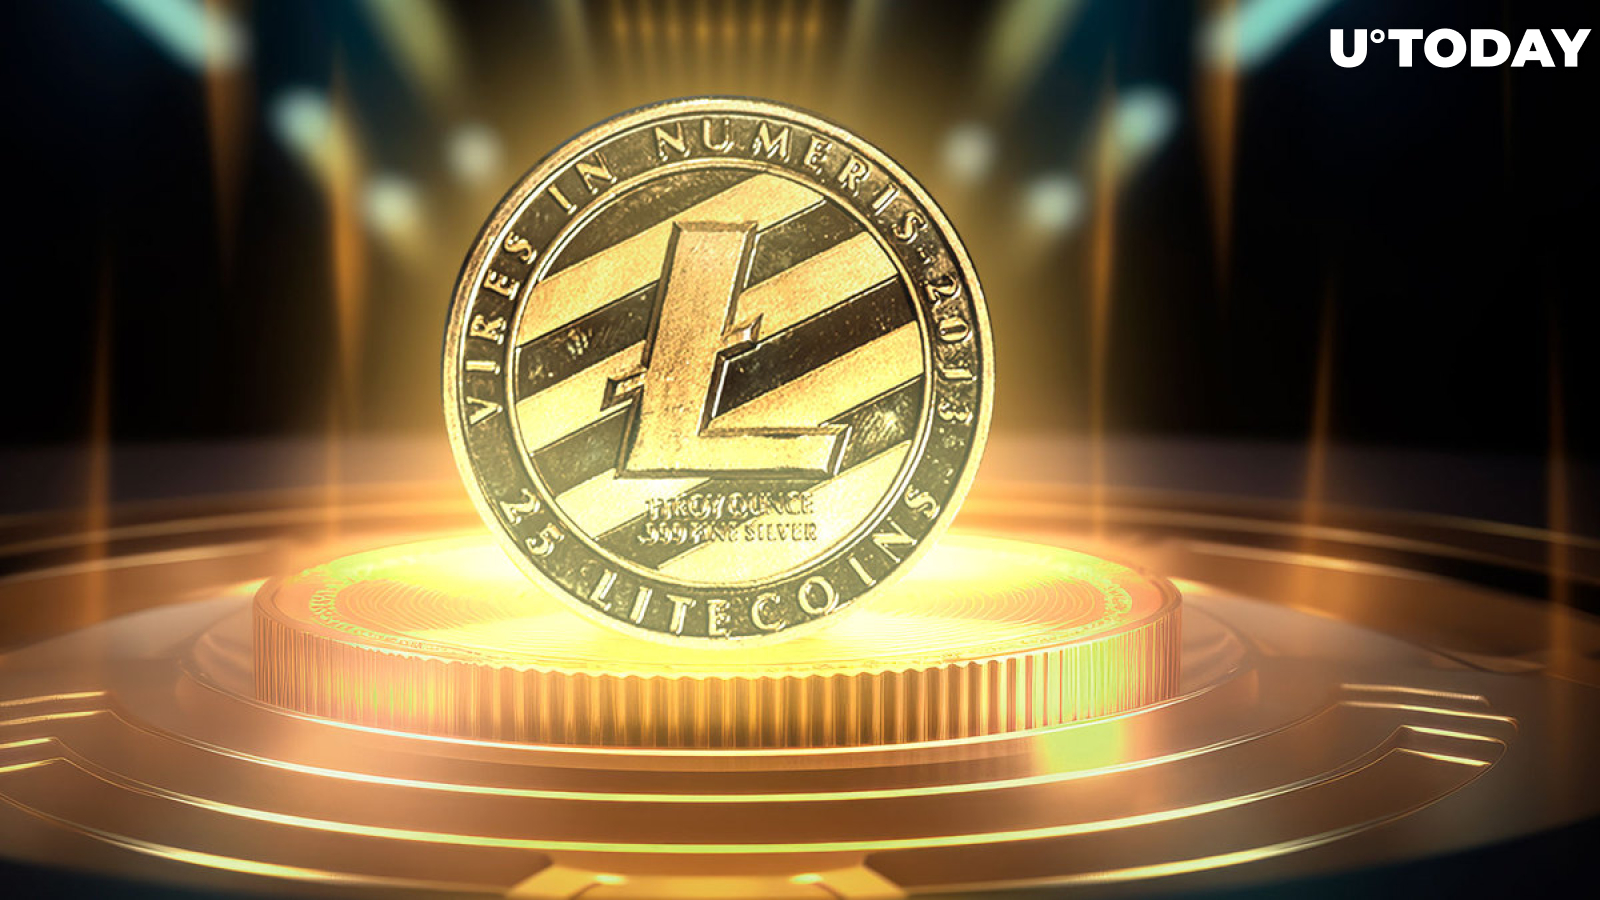 Litecoin (LTC) Smashes New All-Time High But Not in Price